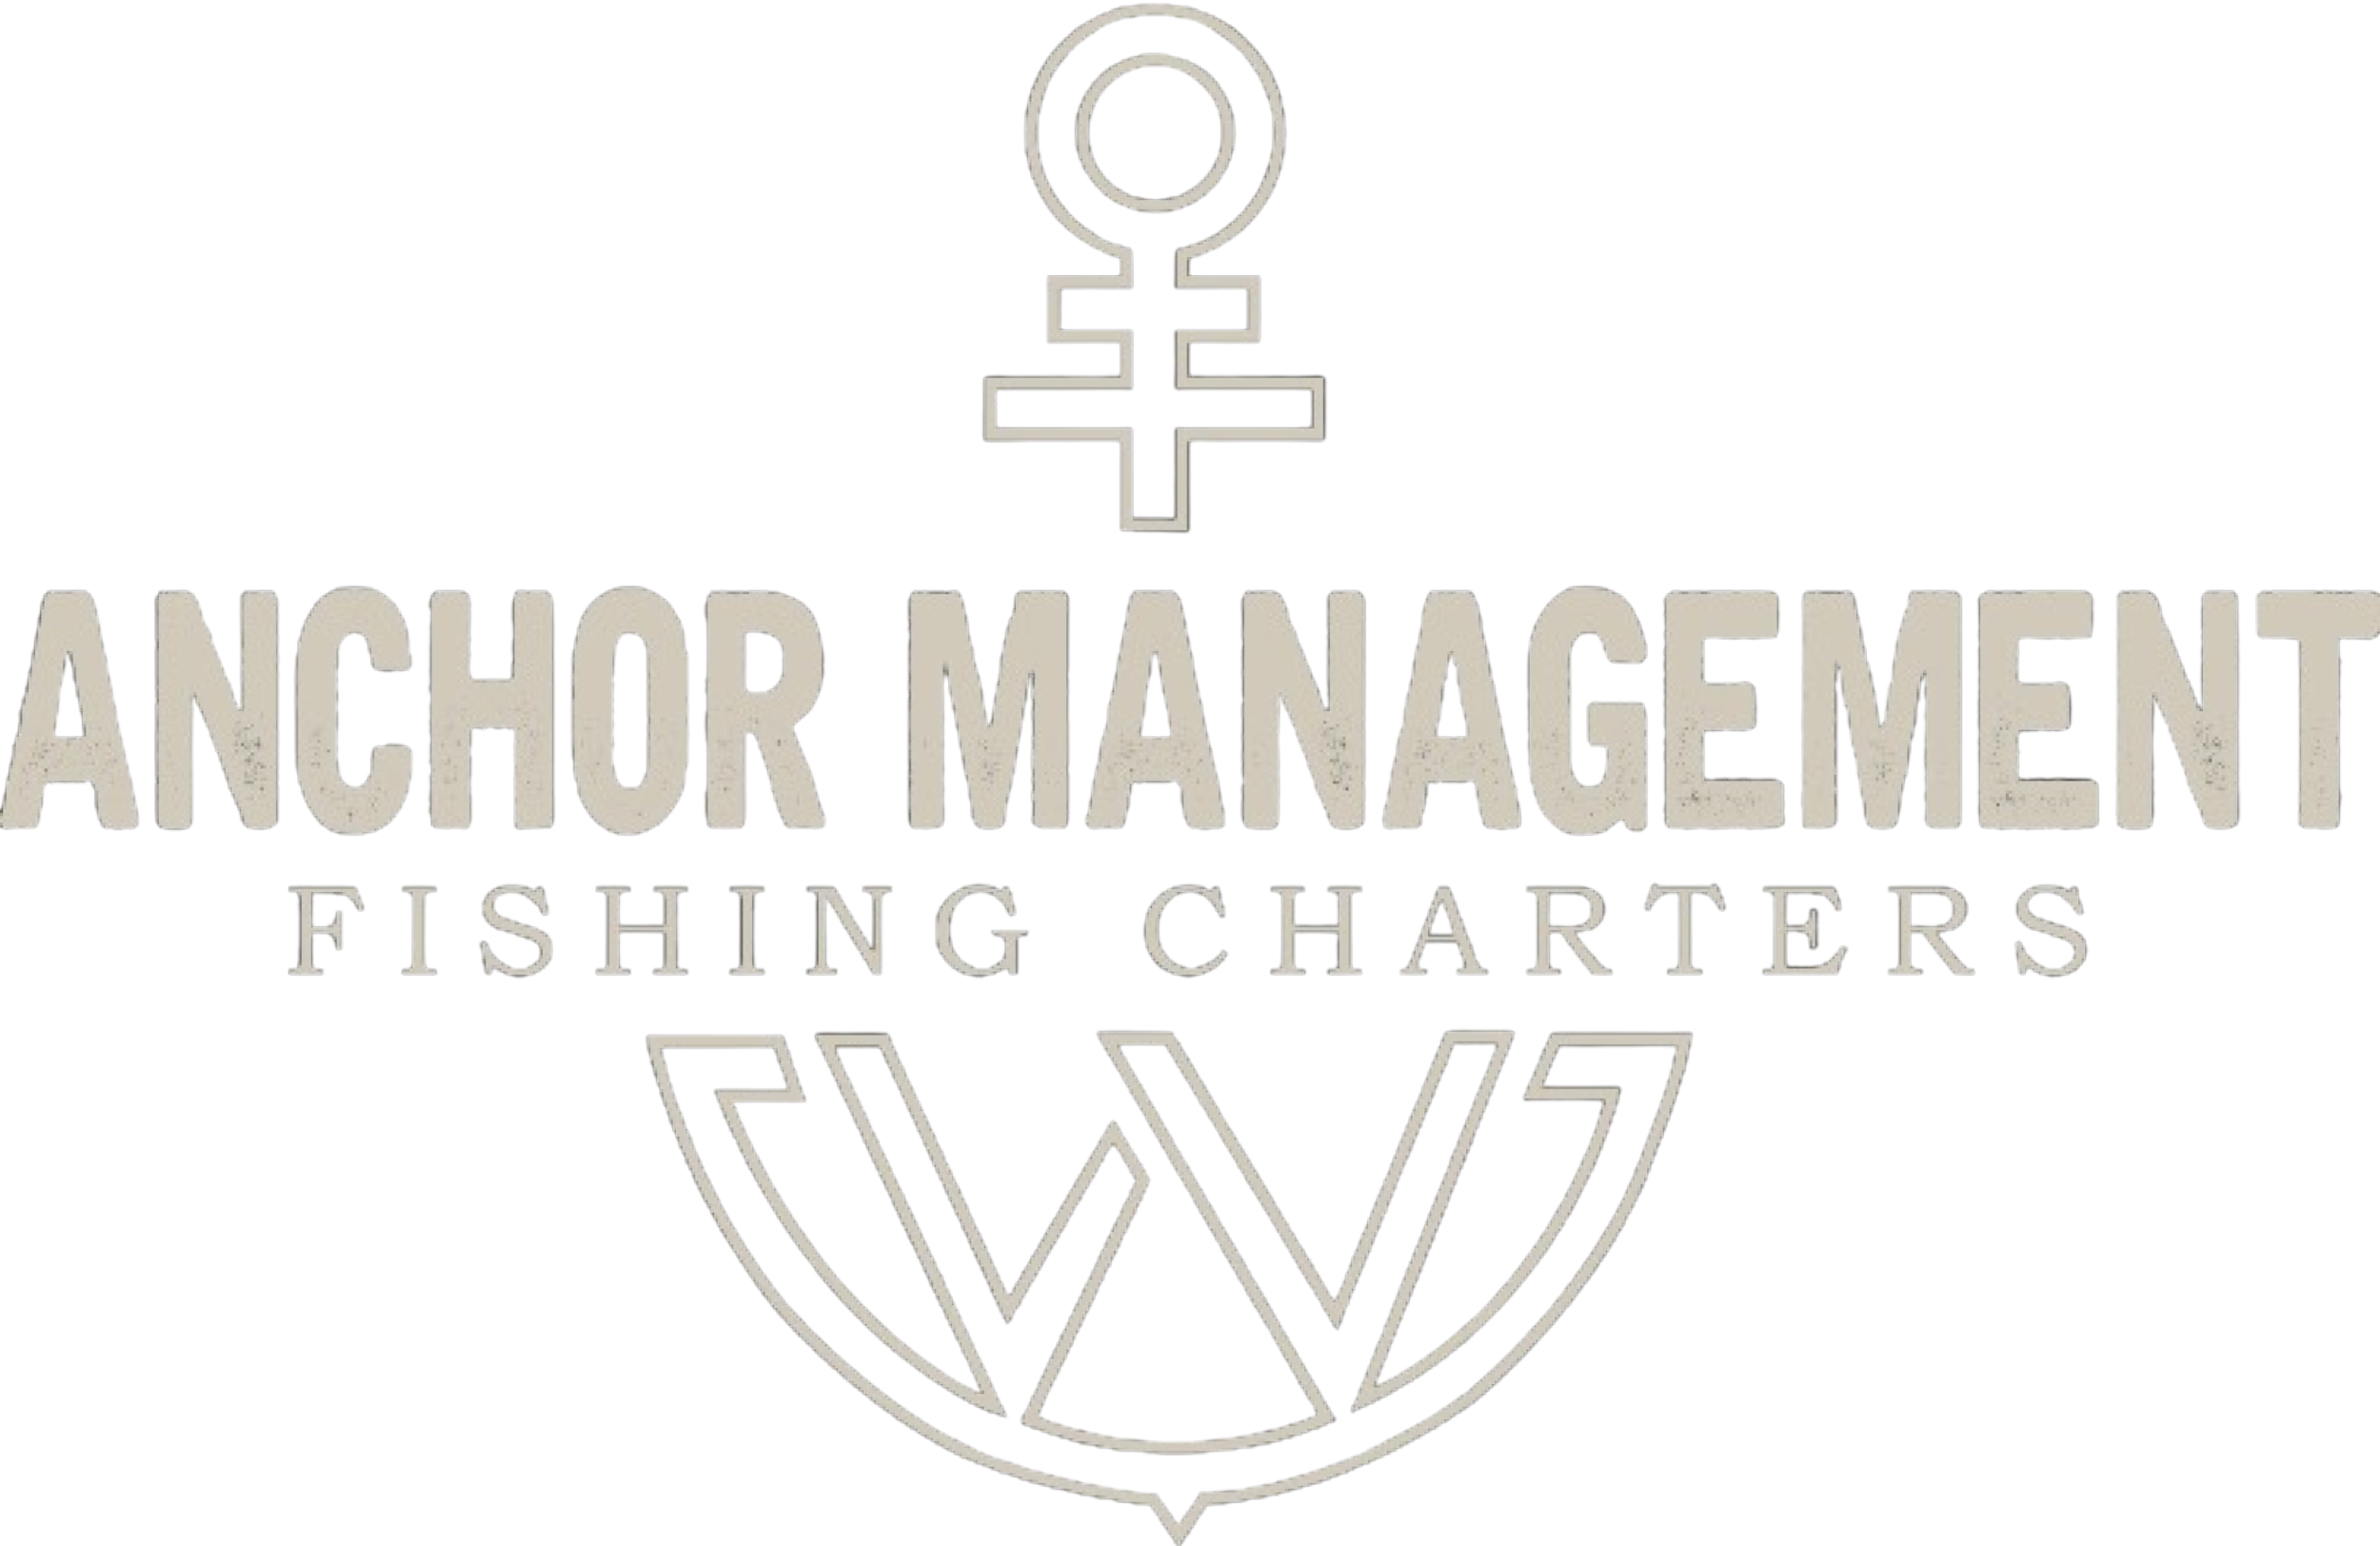 Anchor Management Fishing Charters